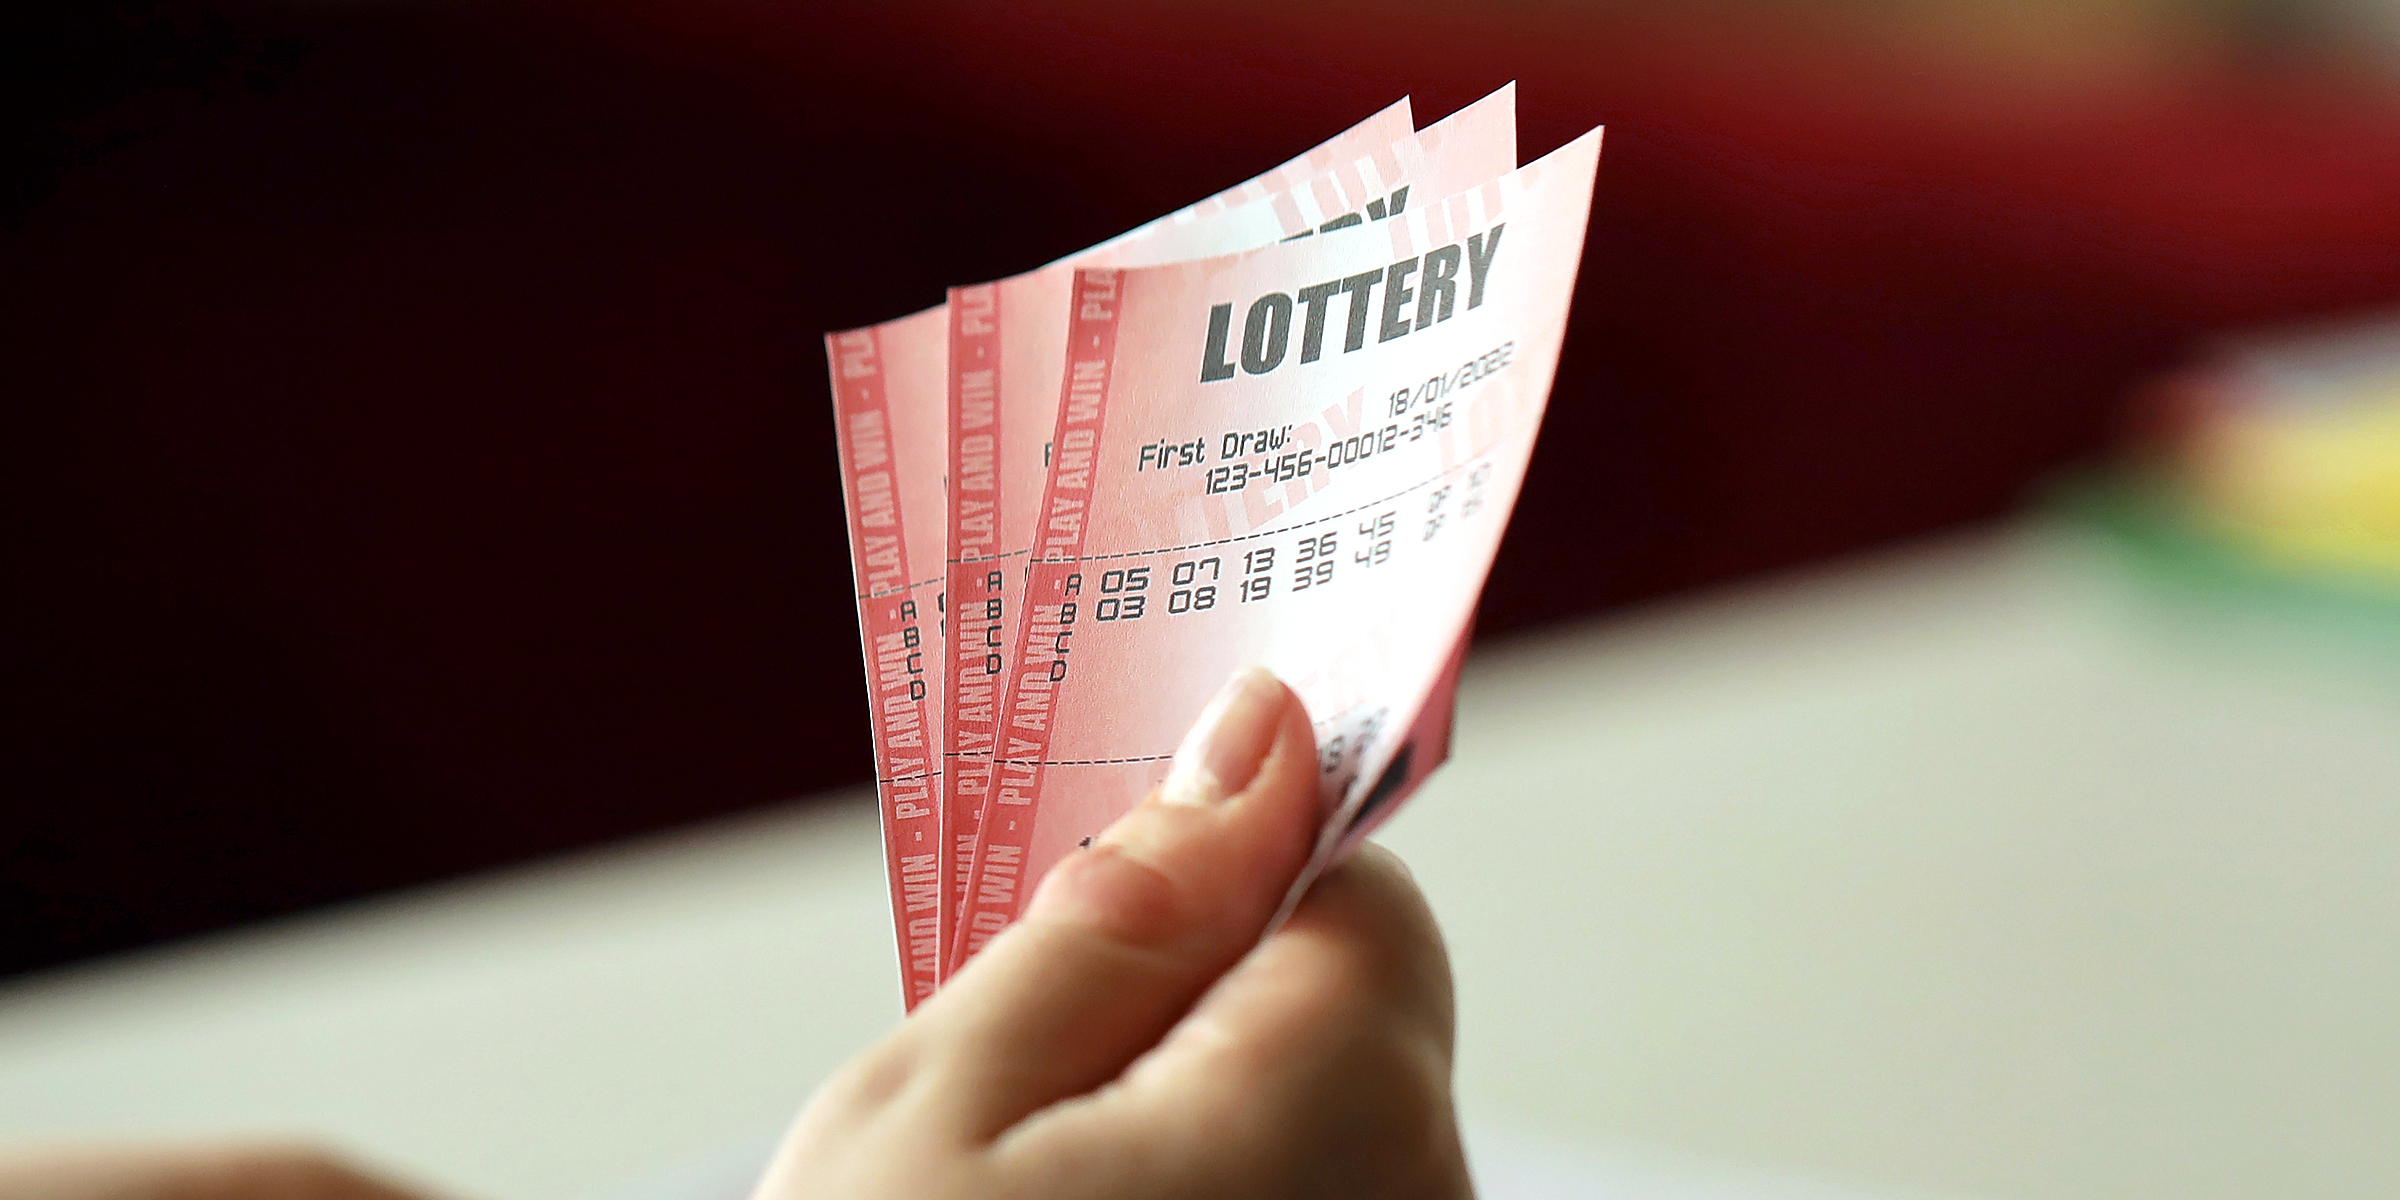 A person holding three lottery tickets | Source: Shutterstock